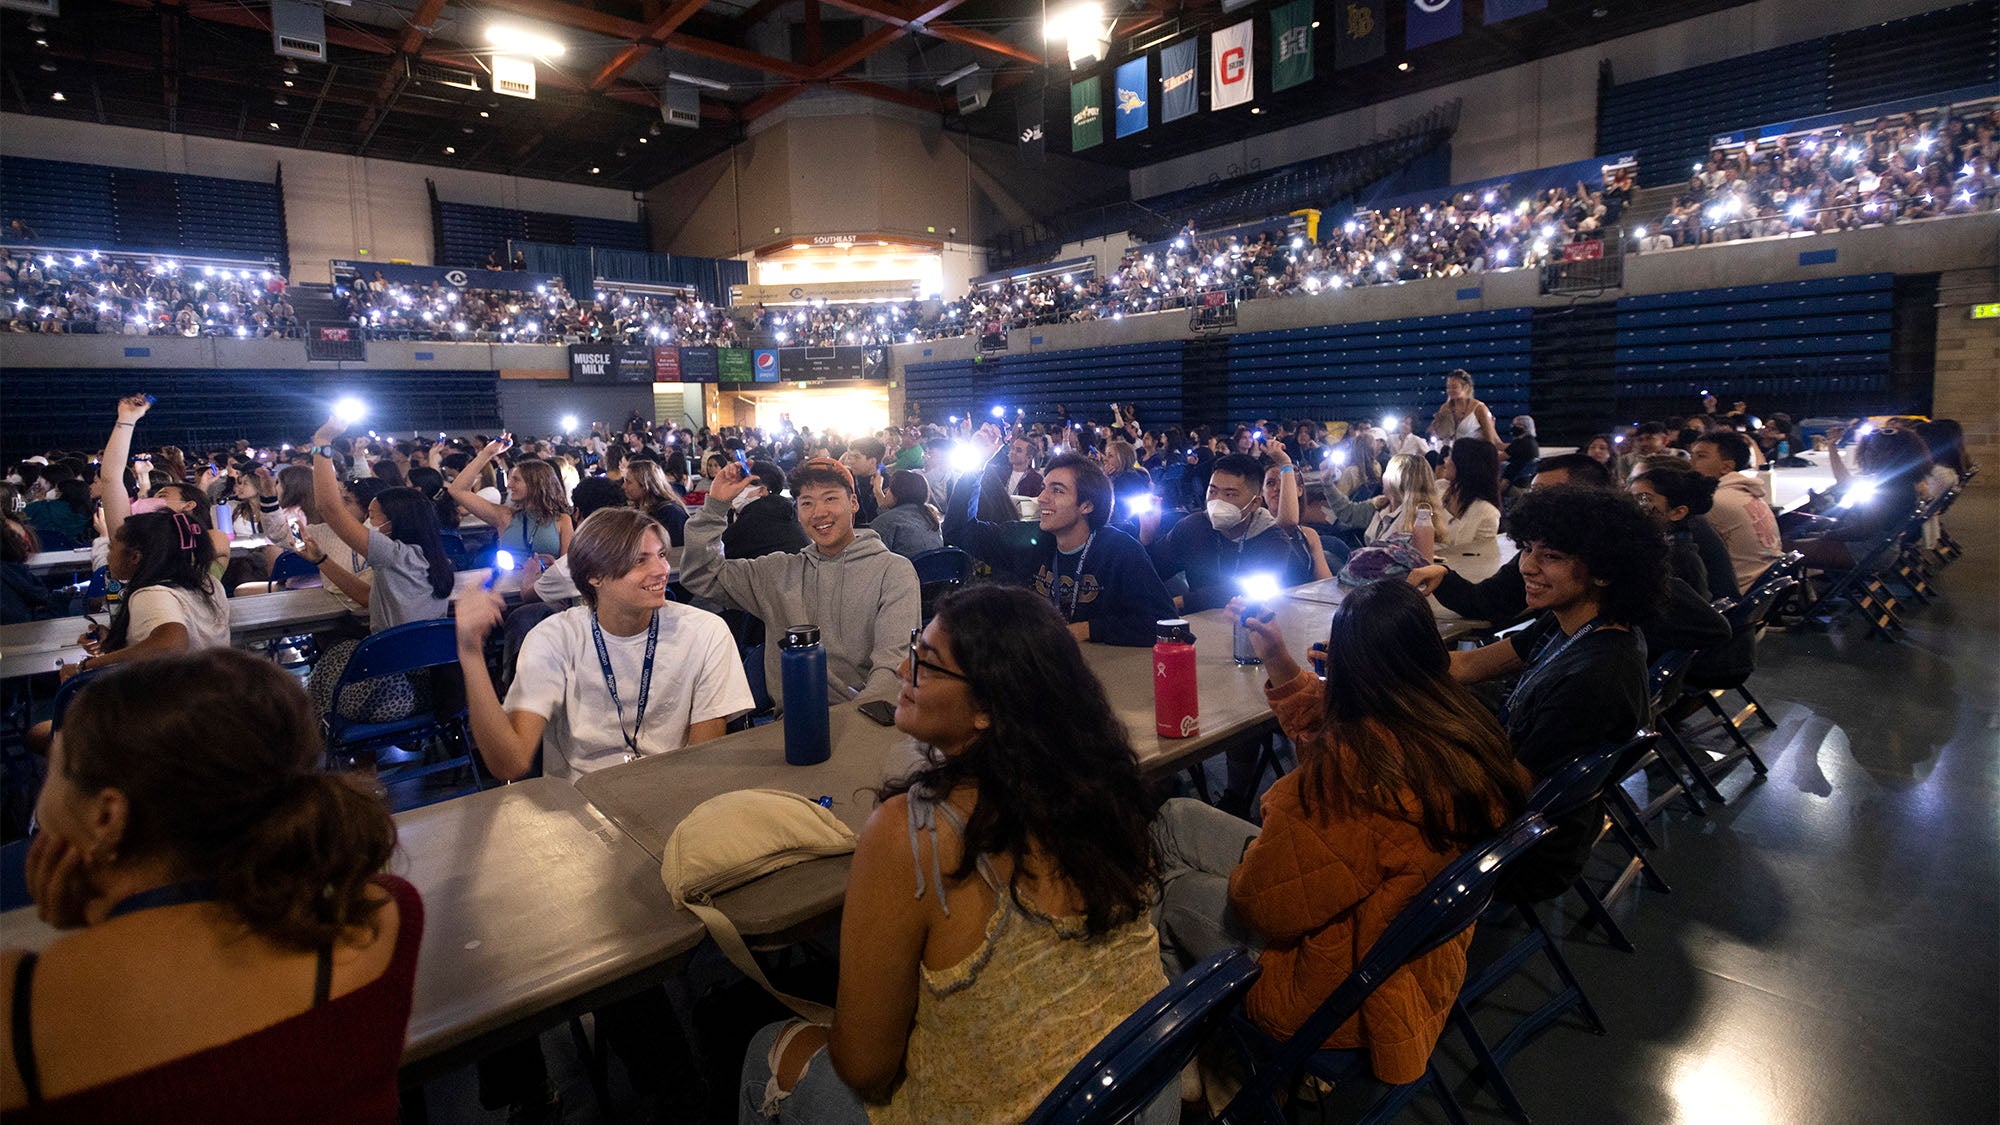 Students hold flashlights in The University Credit Union Center